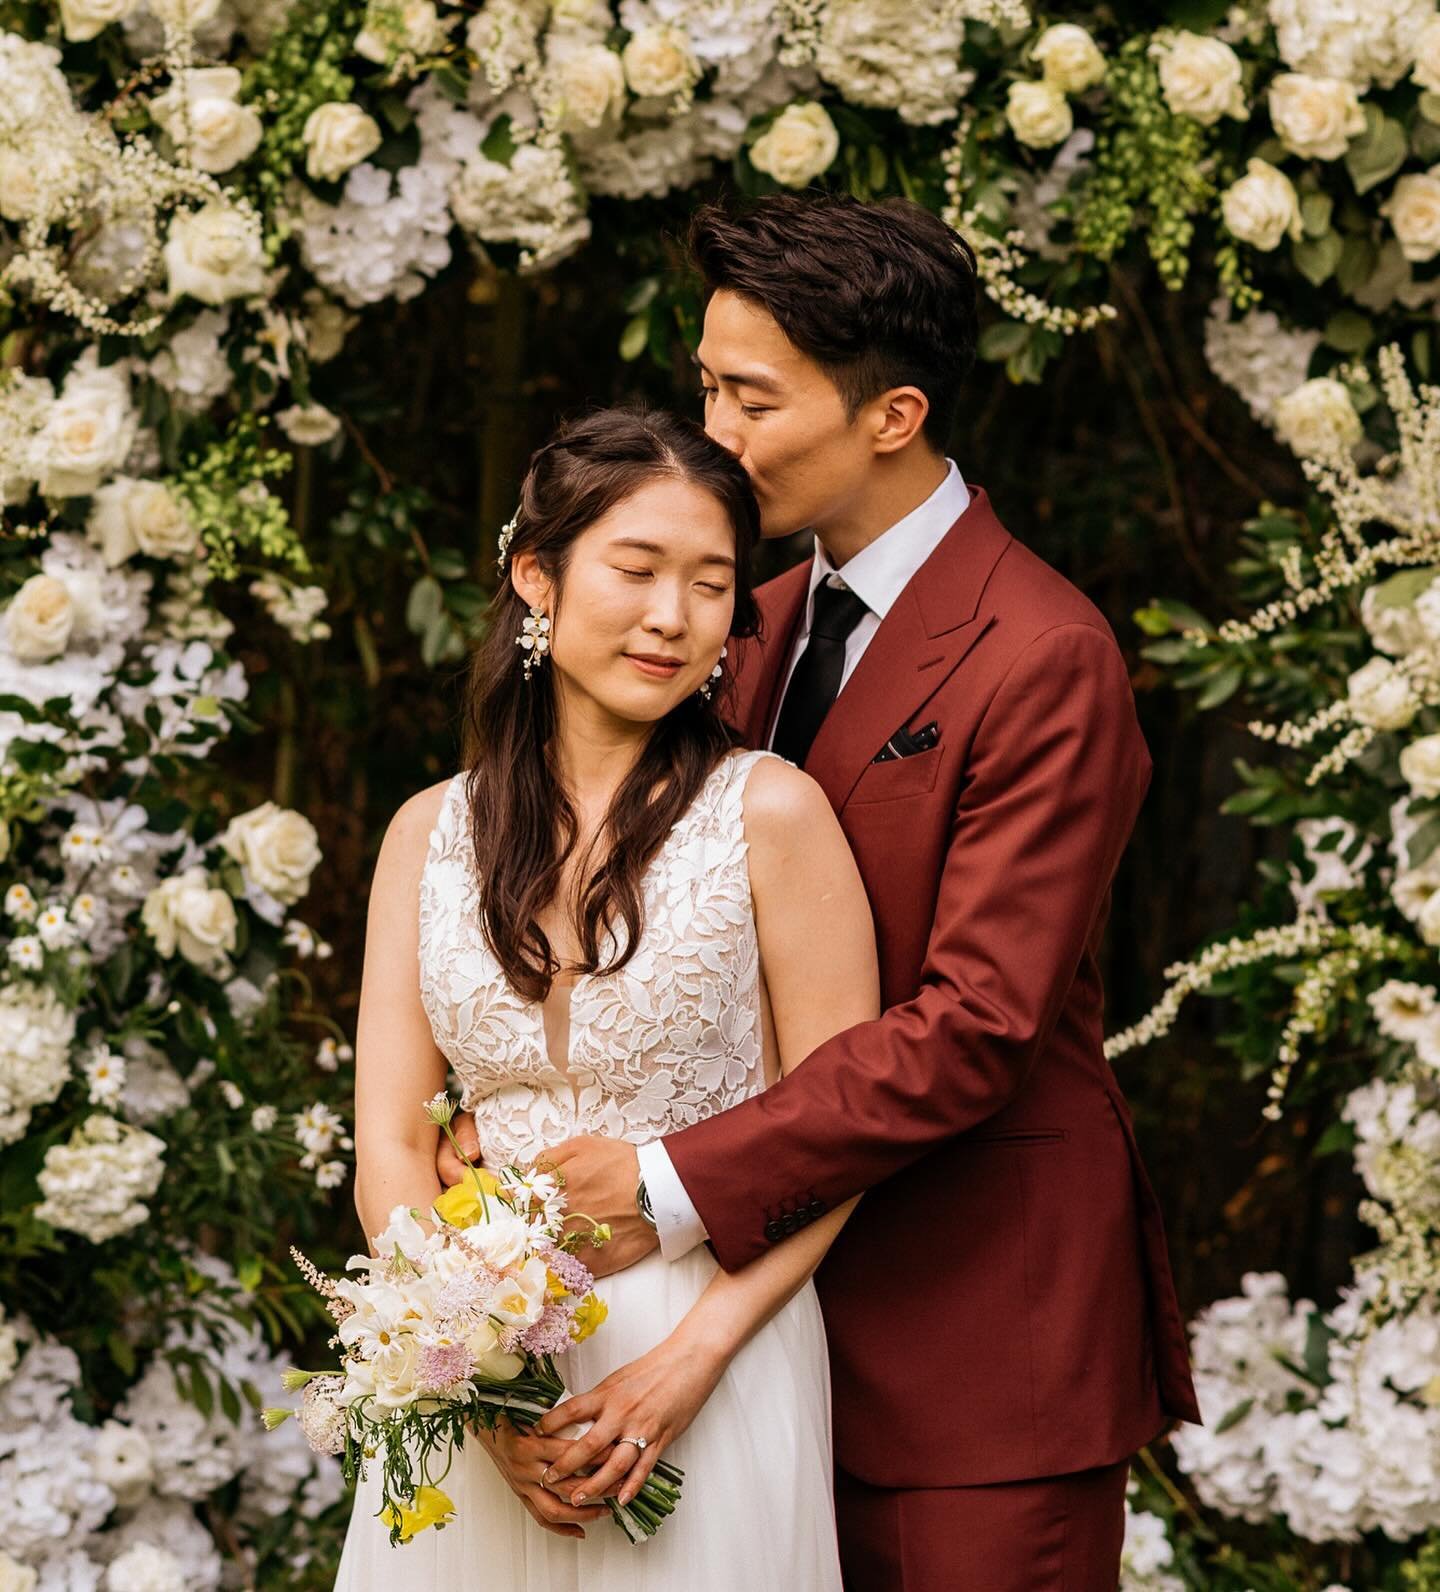 The best thing about a garden wedding is the florals on florals on florals. This white rose &amp; hydrangeas floral arch was just *chef&rsquo;s kiss* 🤩🥰🙌 Sharing more from lil bro&rsquo;s destination wedding in Korea ❤️